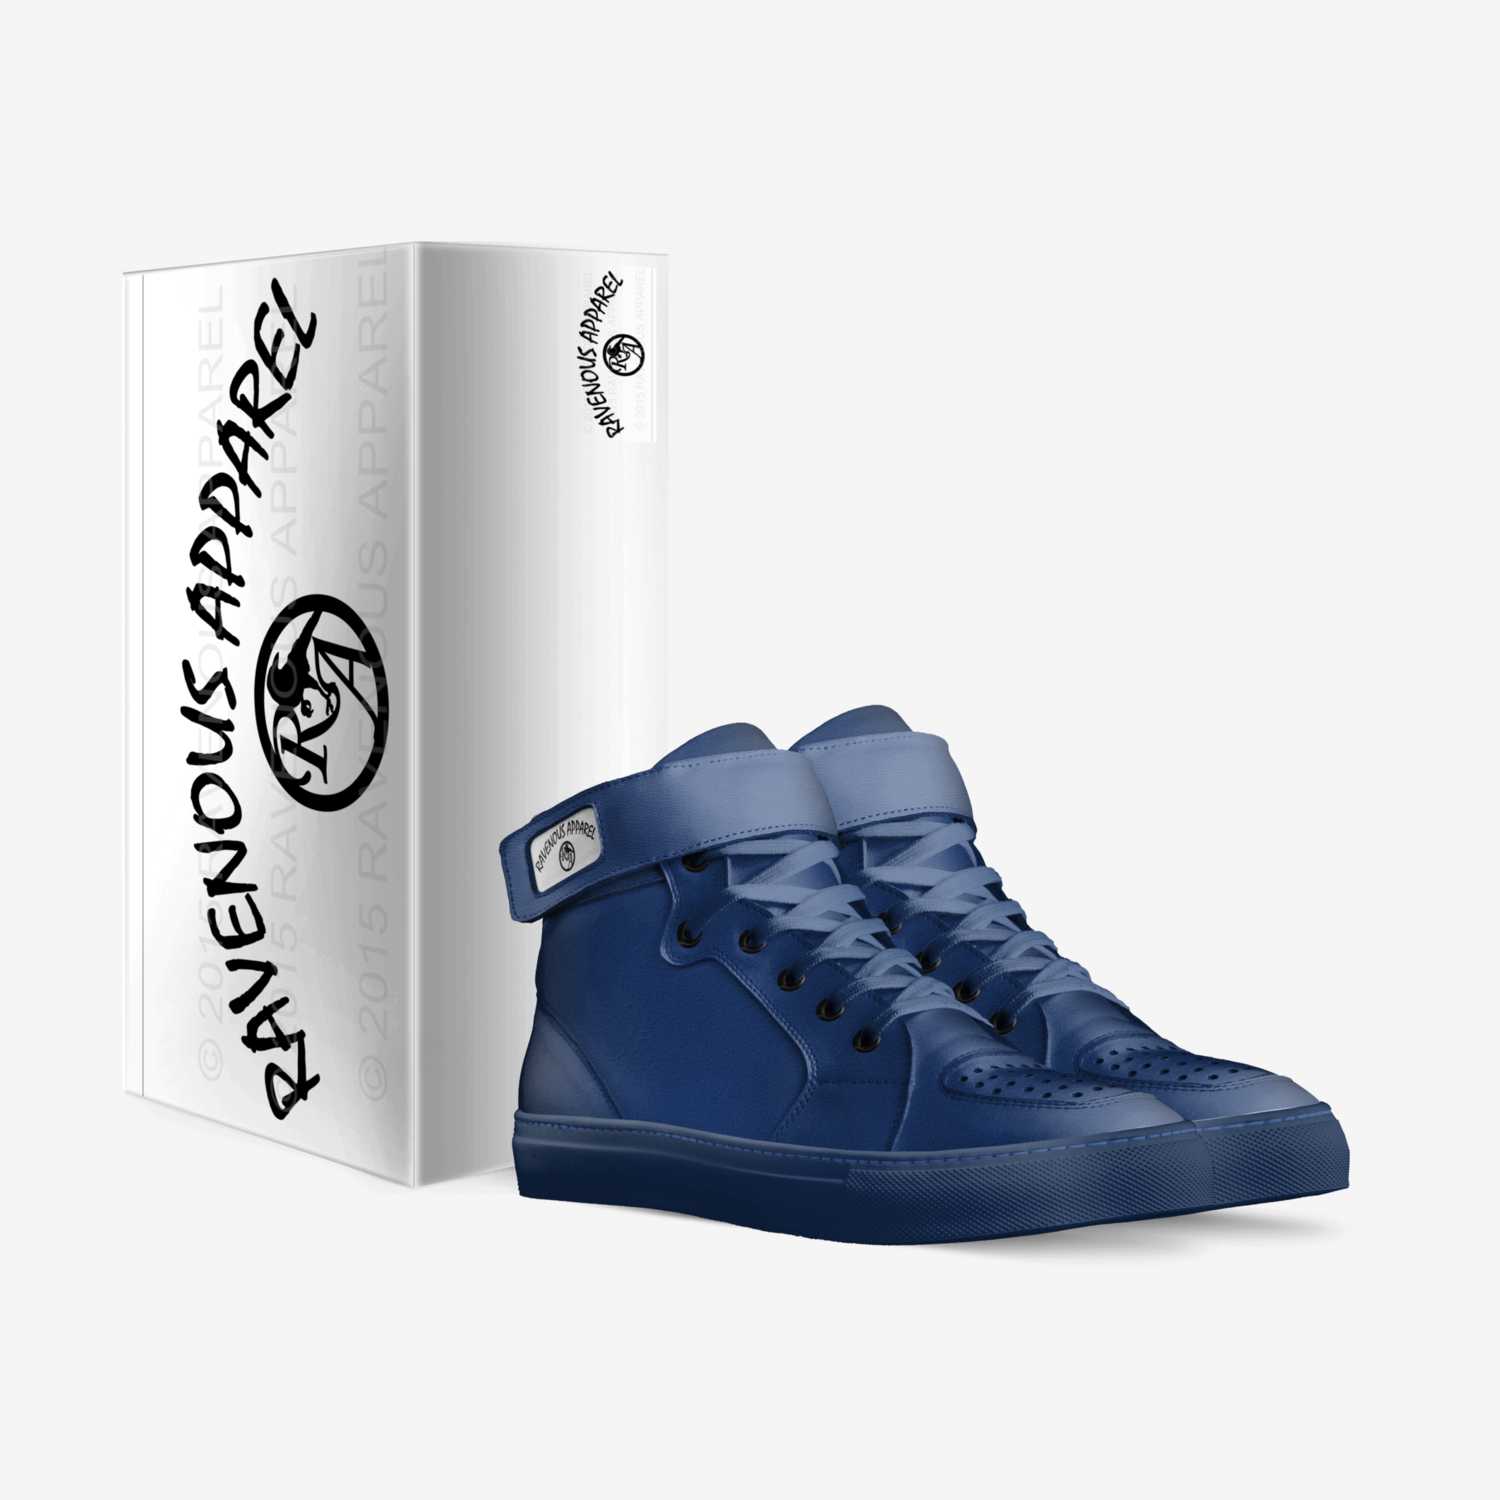 RaveBlues custom made in Italy shoes by Thomas Rodriguez | Box view